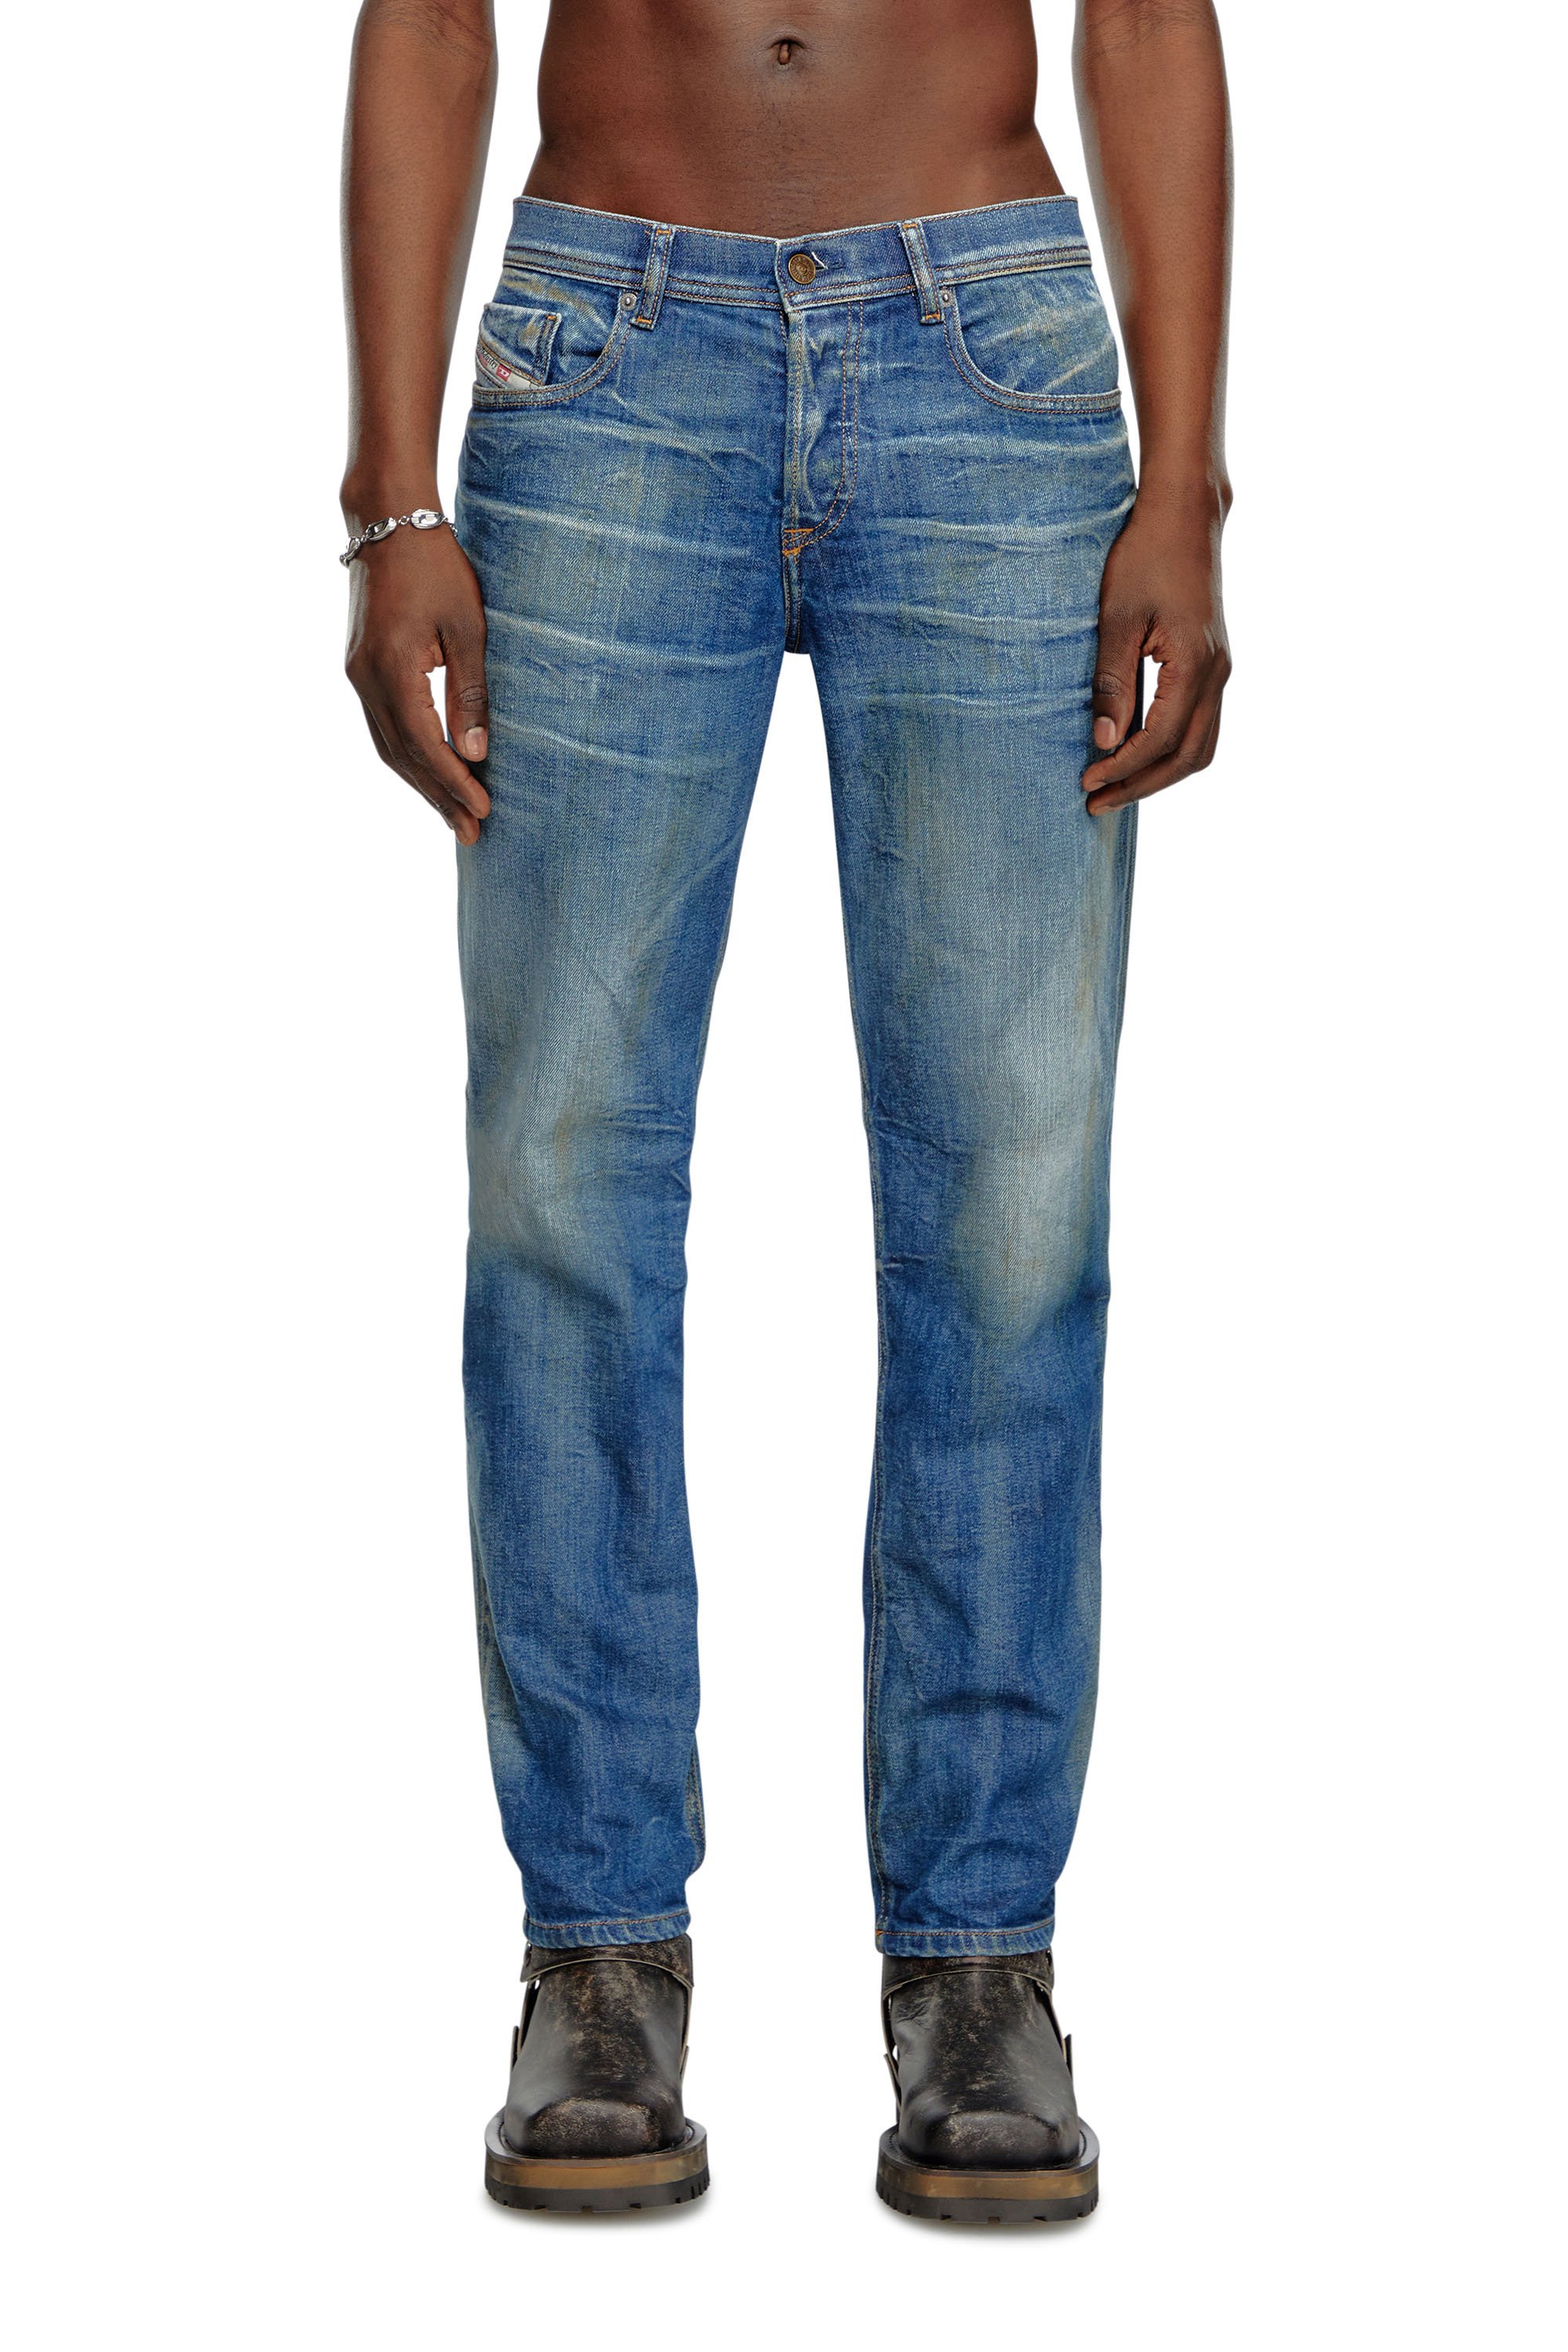 Diesel - Tapered Jeans 2023 D-Finitive 09J66, Hombre Tapered Jeans - 2023 D-Finitive in Azul marino - Image 1